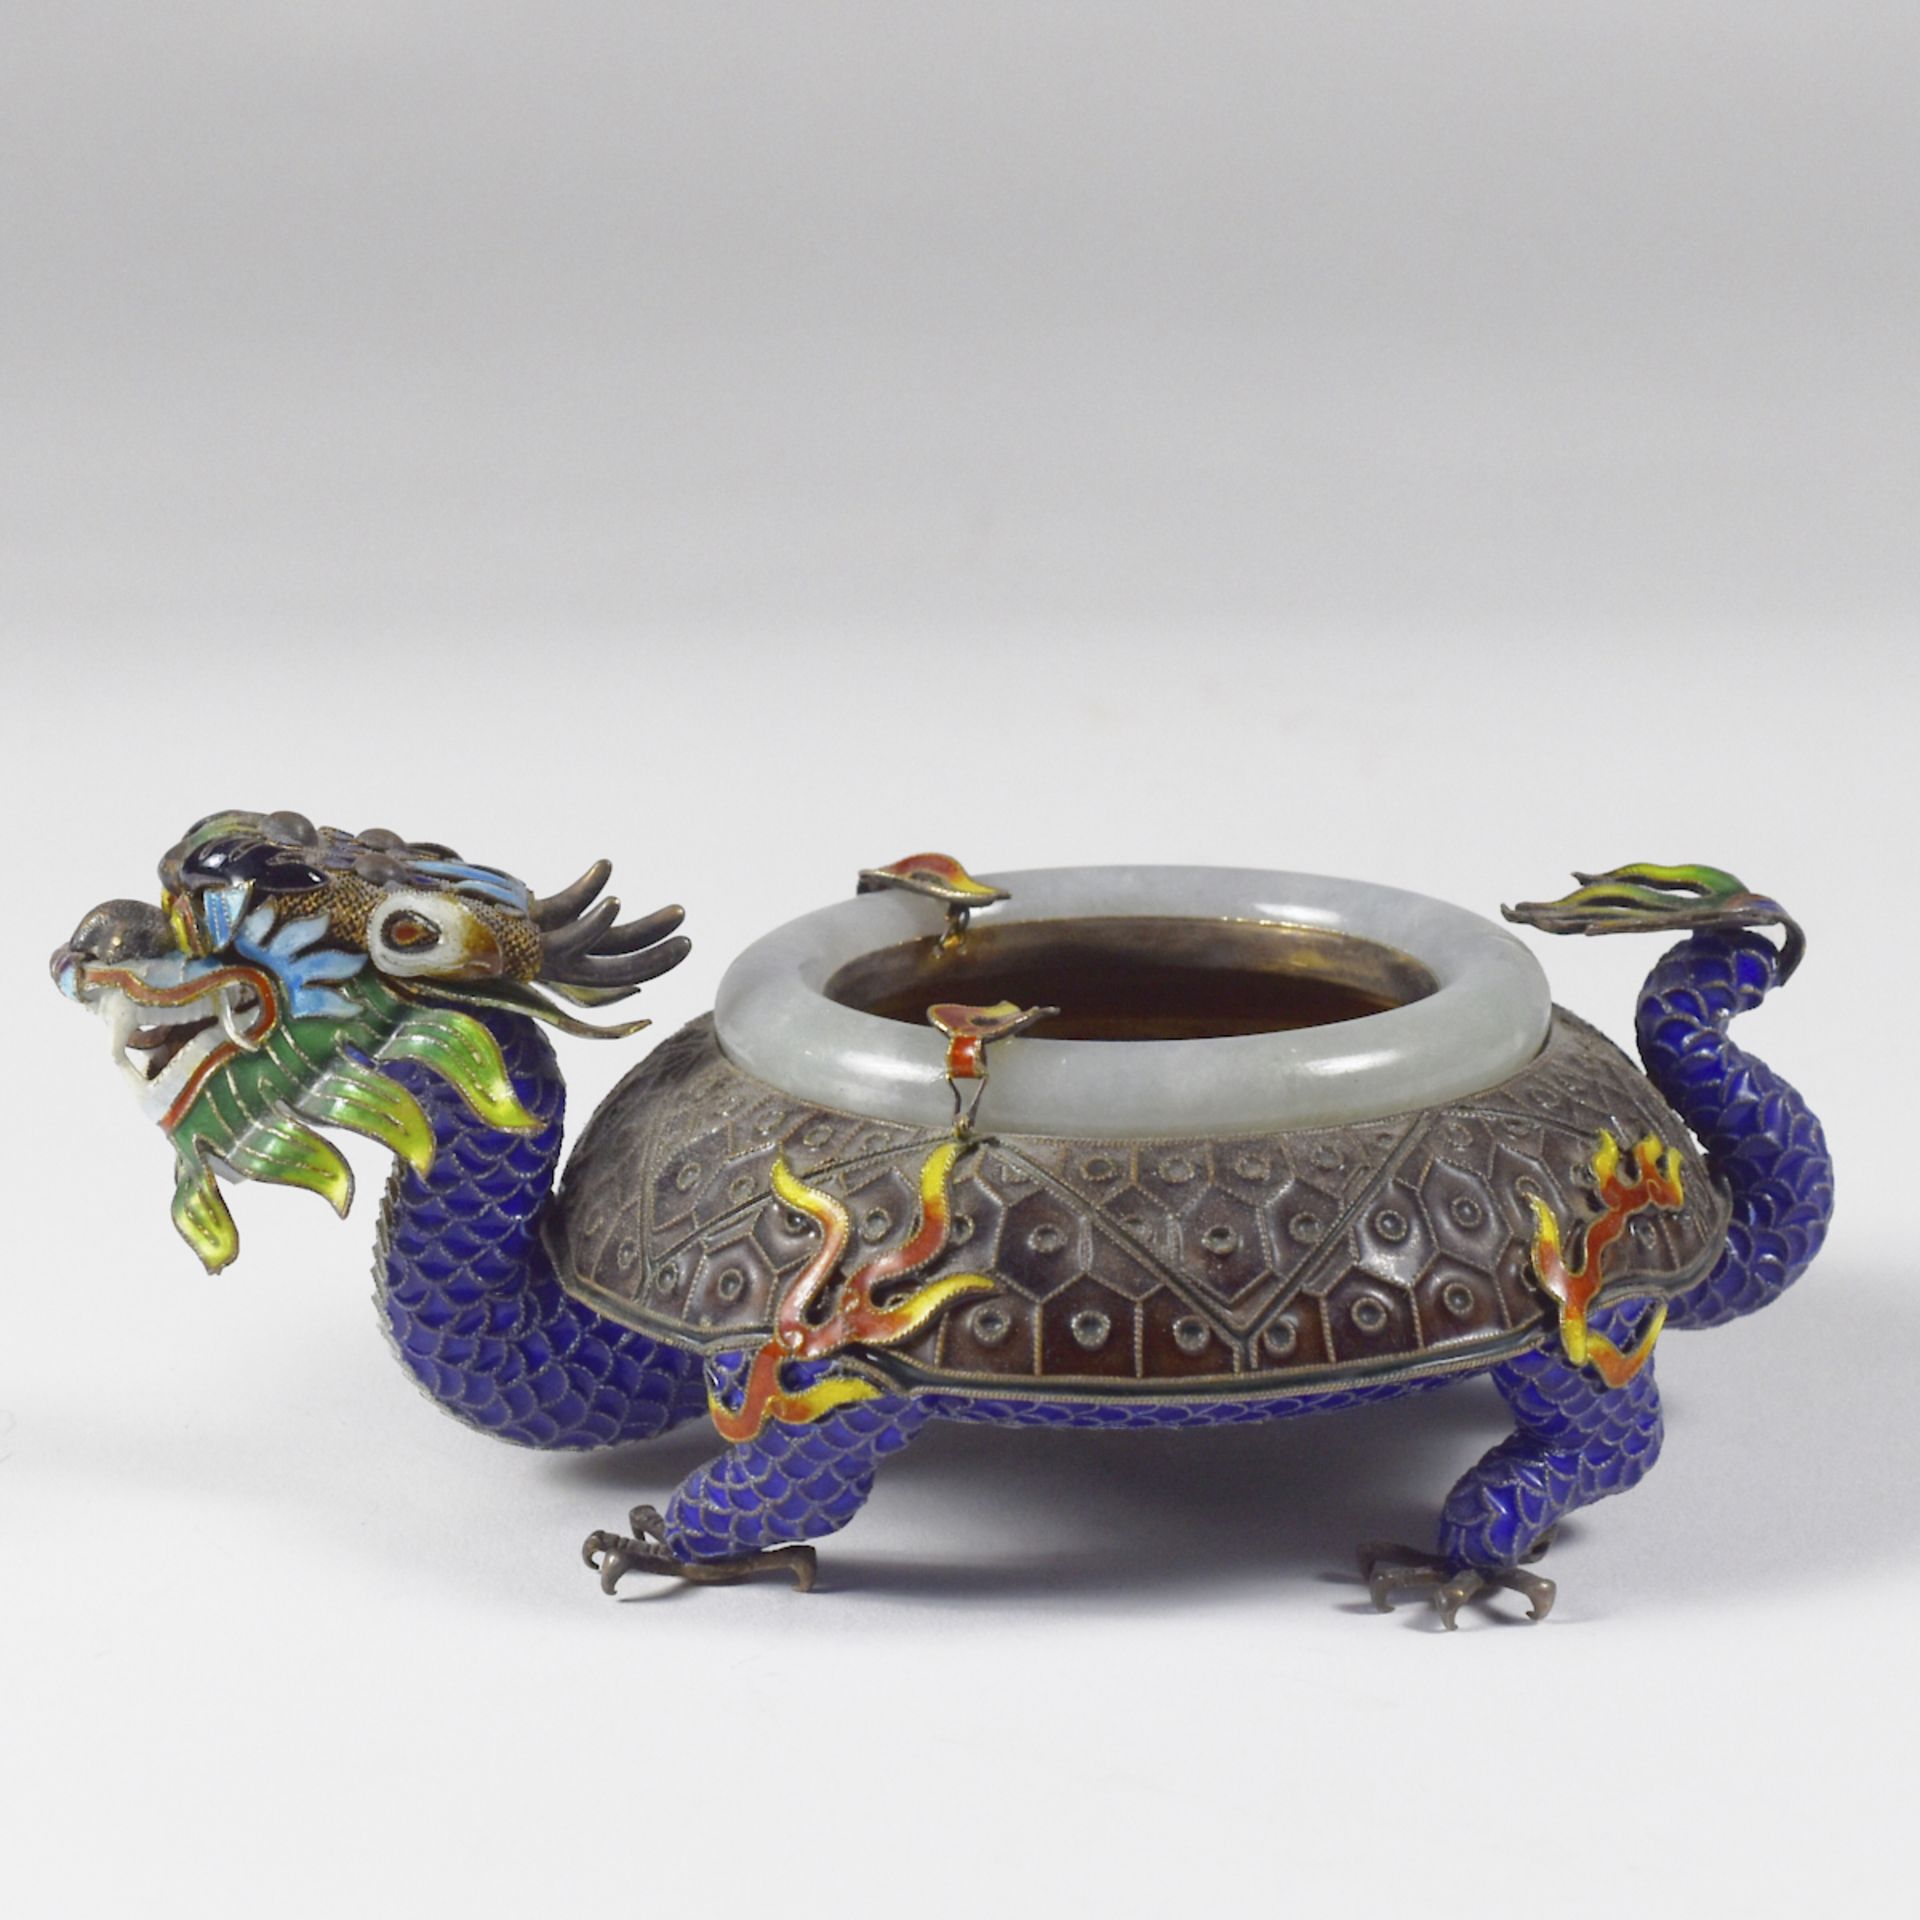 20th c. Chinese Silver Enameled Silver & Jade Dragon Ashtray - Image 3 of 8